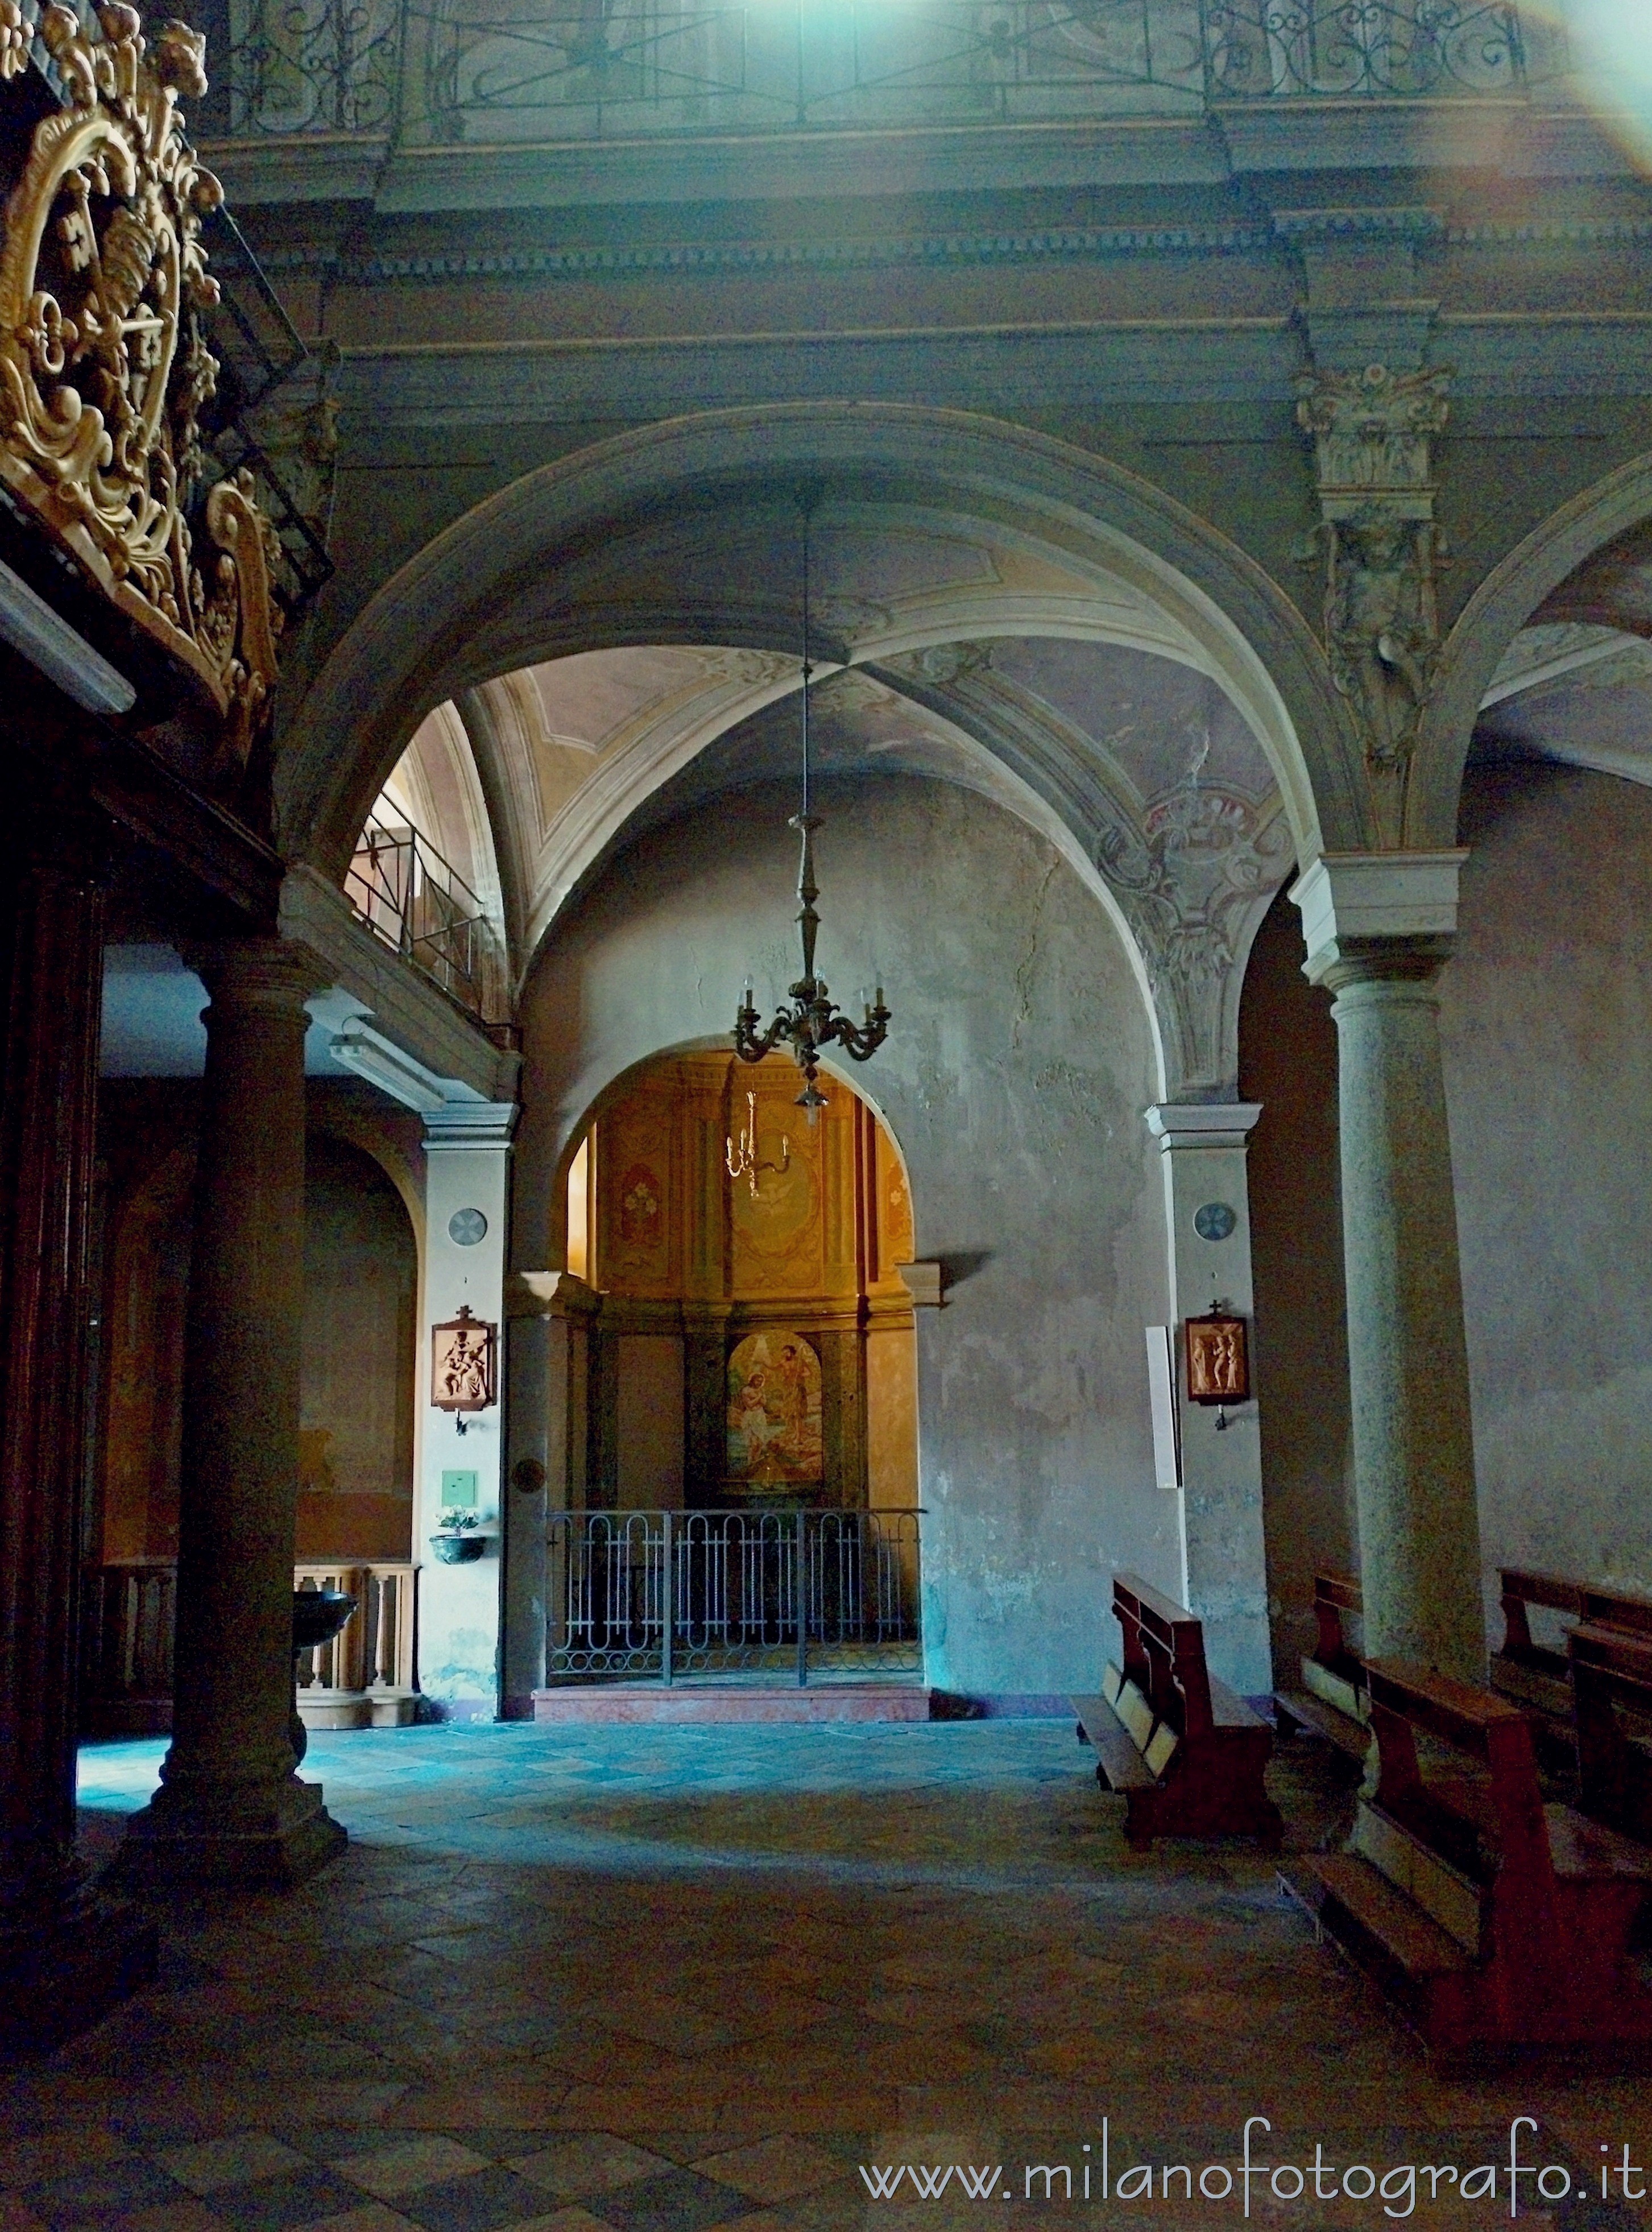 Candelo (Biella, Italy): Detail of the interior of the Church of San Pietro - Candelo (Biella, Italy)